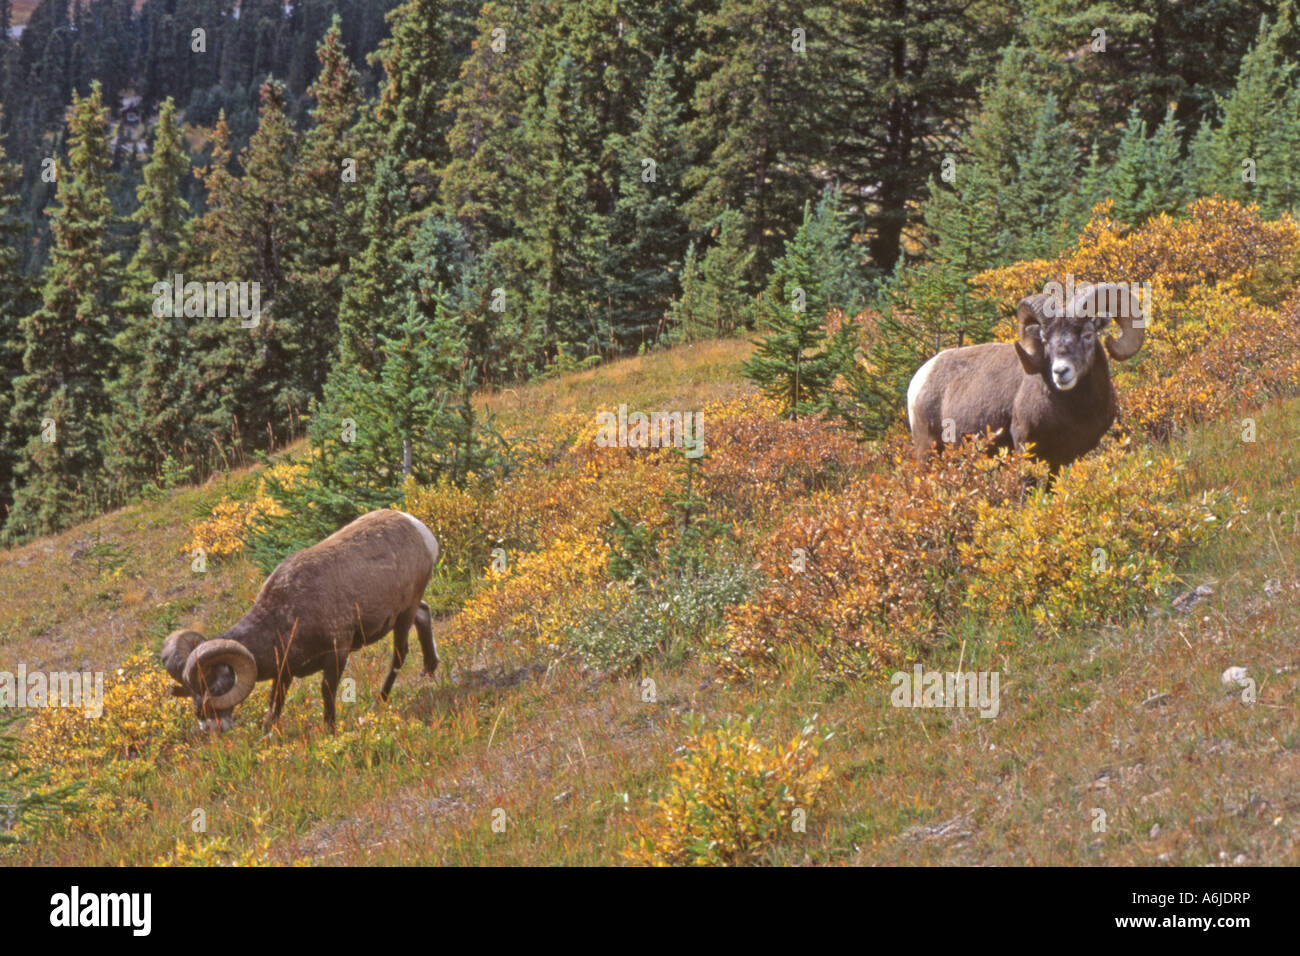 Bighorn Sheep, American Bighorn, Mountain Sheep (Ovis canadensis), two males (rams) standing on slope Stock Photo